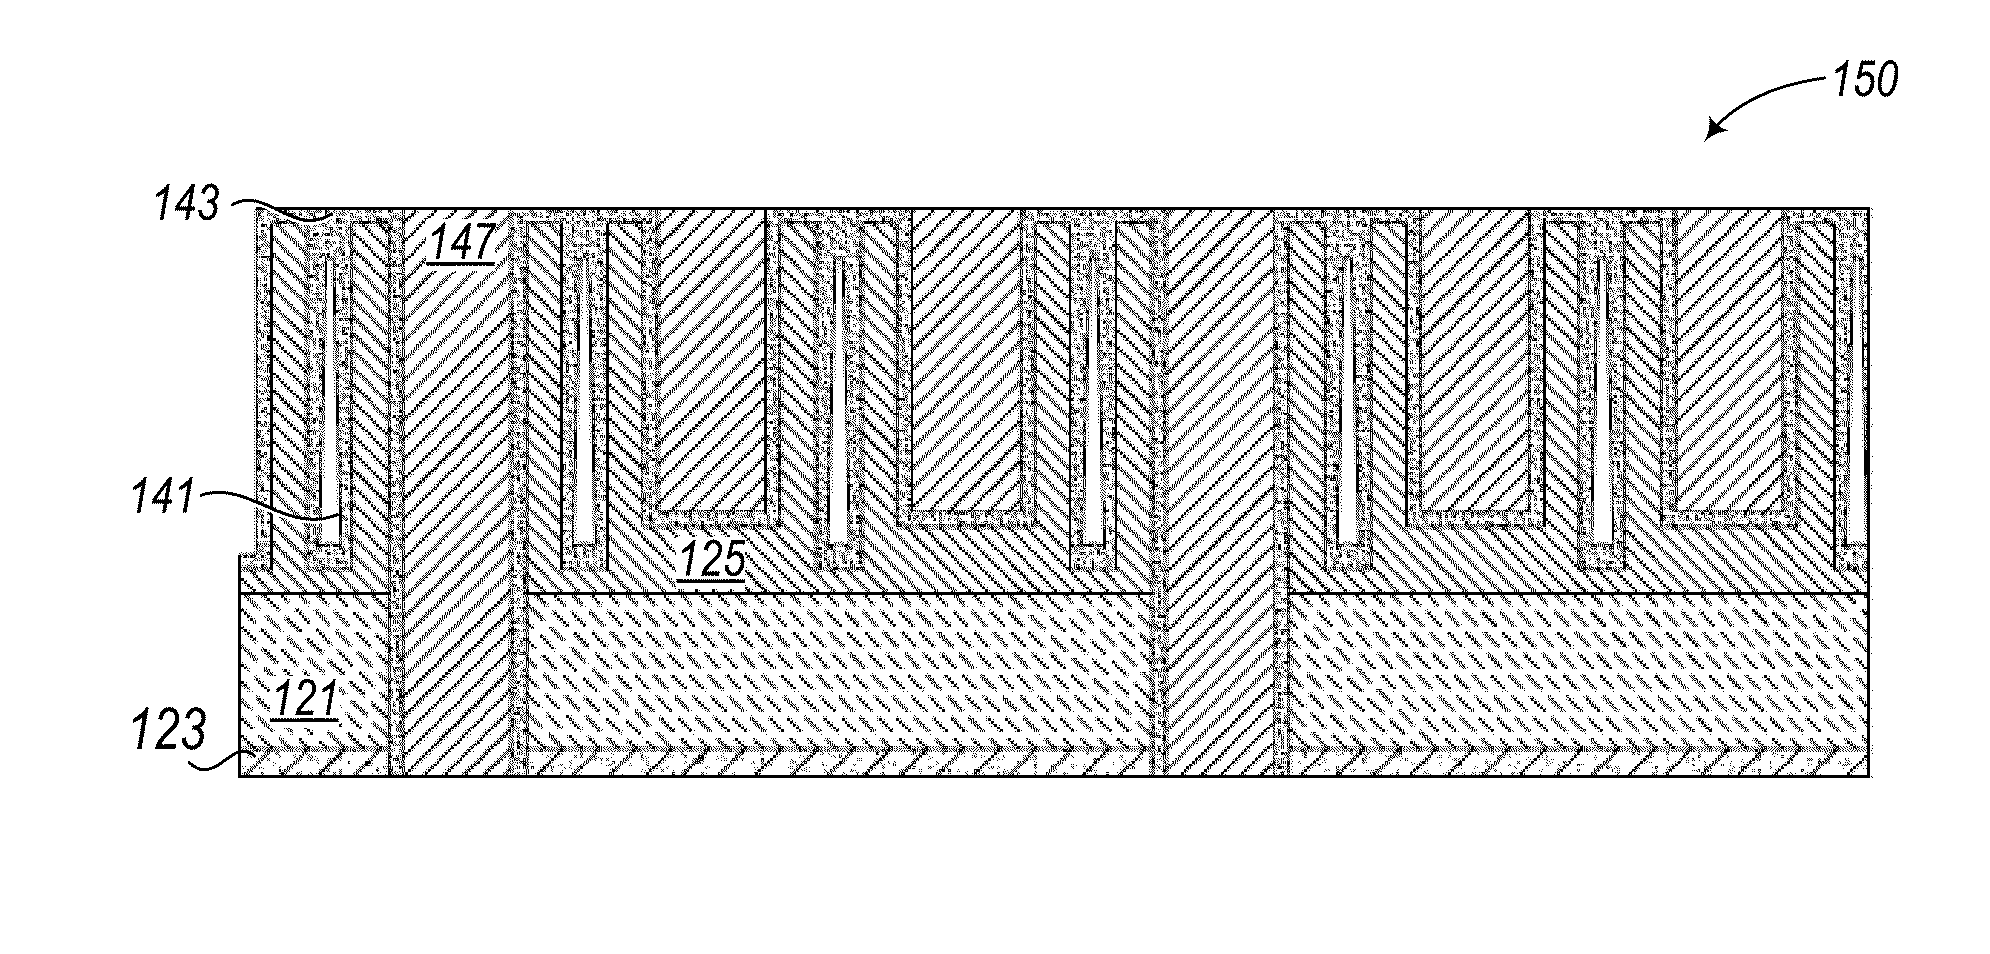 Trench interconnect having reduced fringe capacitance